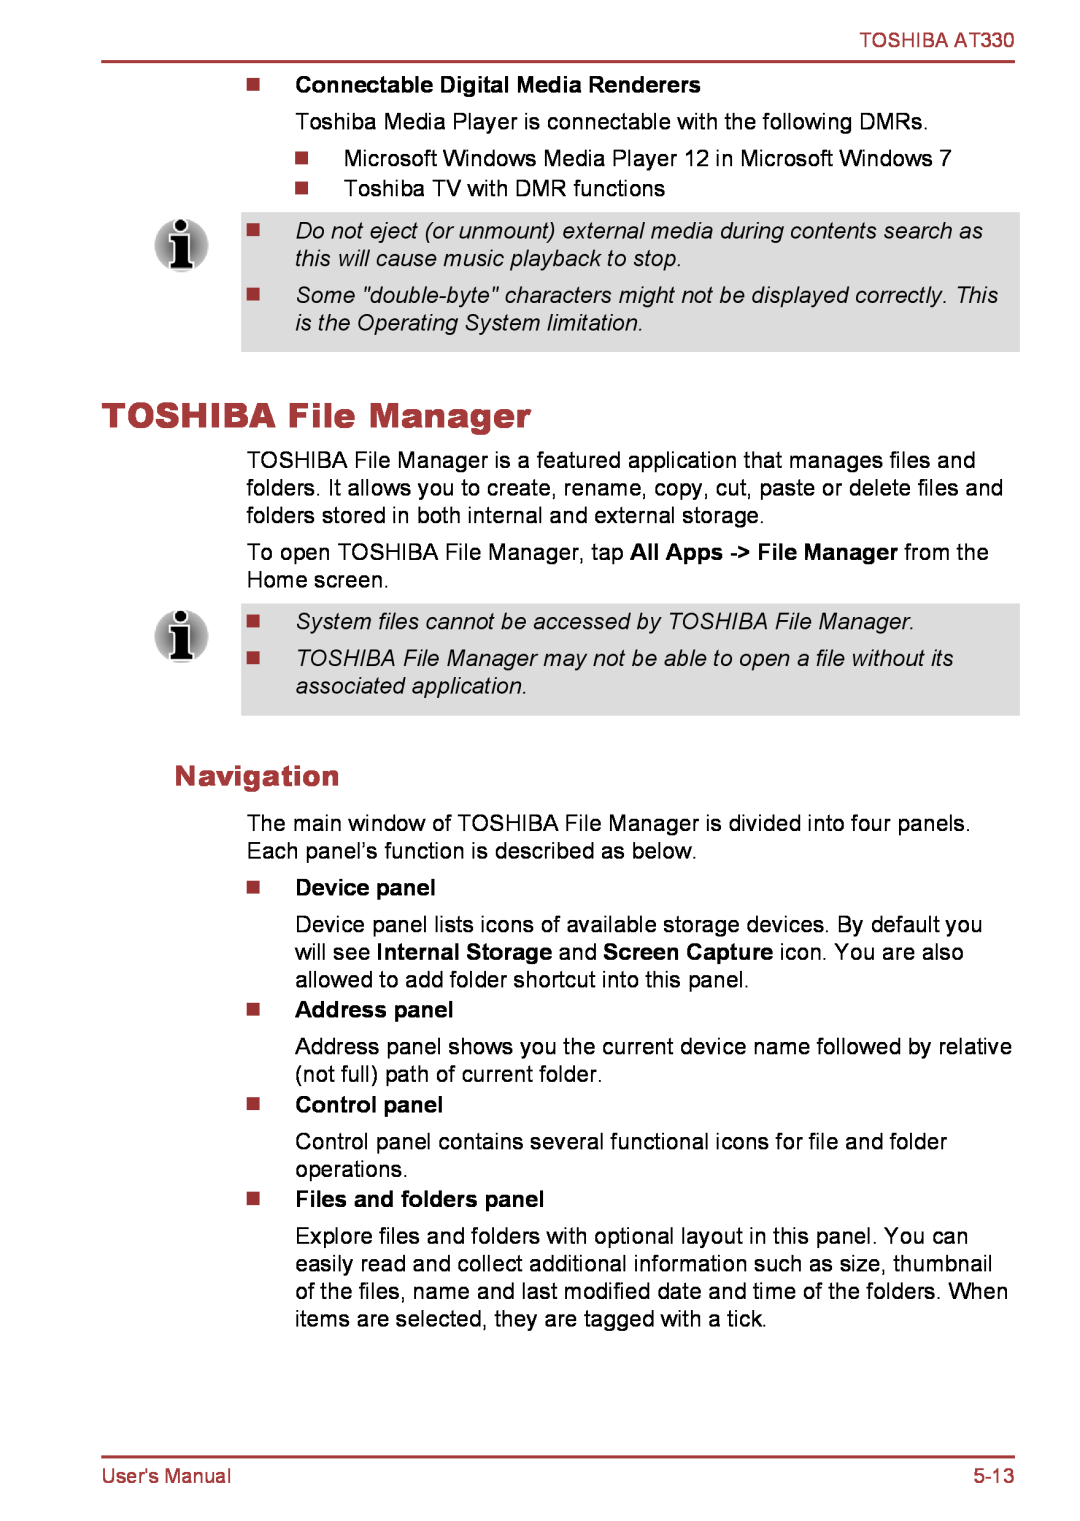 Toshiba at330 TOSHIBA File Manager, Navigation, Connectable Digital Media Renderers, Device panel, Address panel 